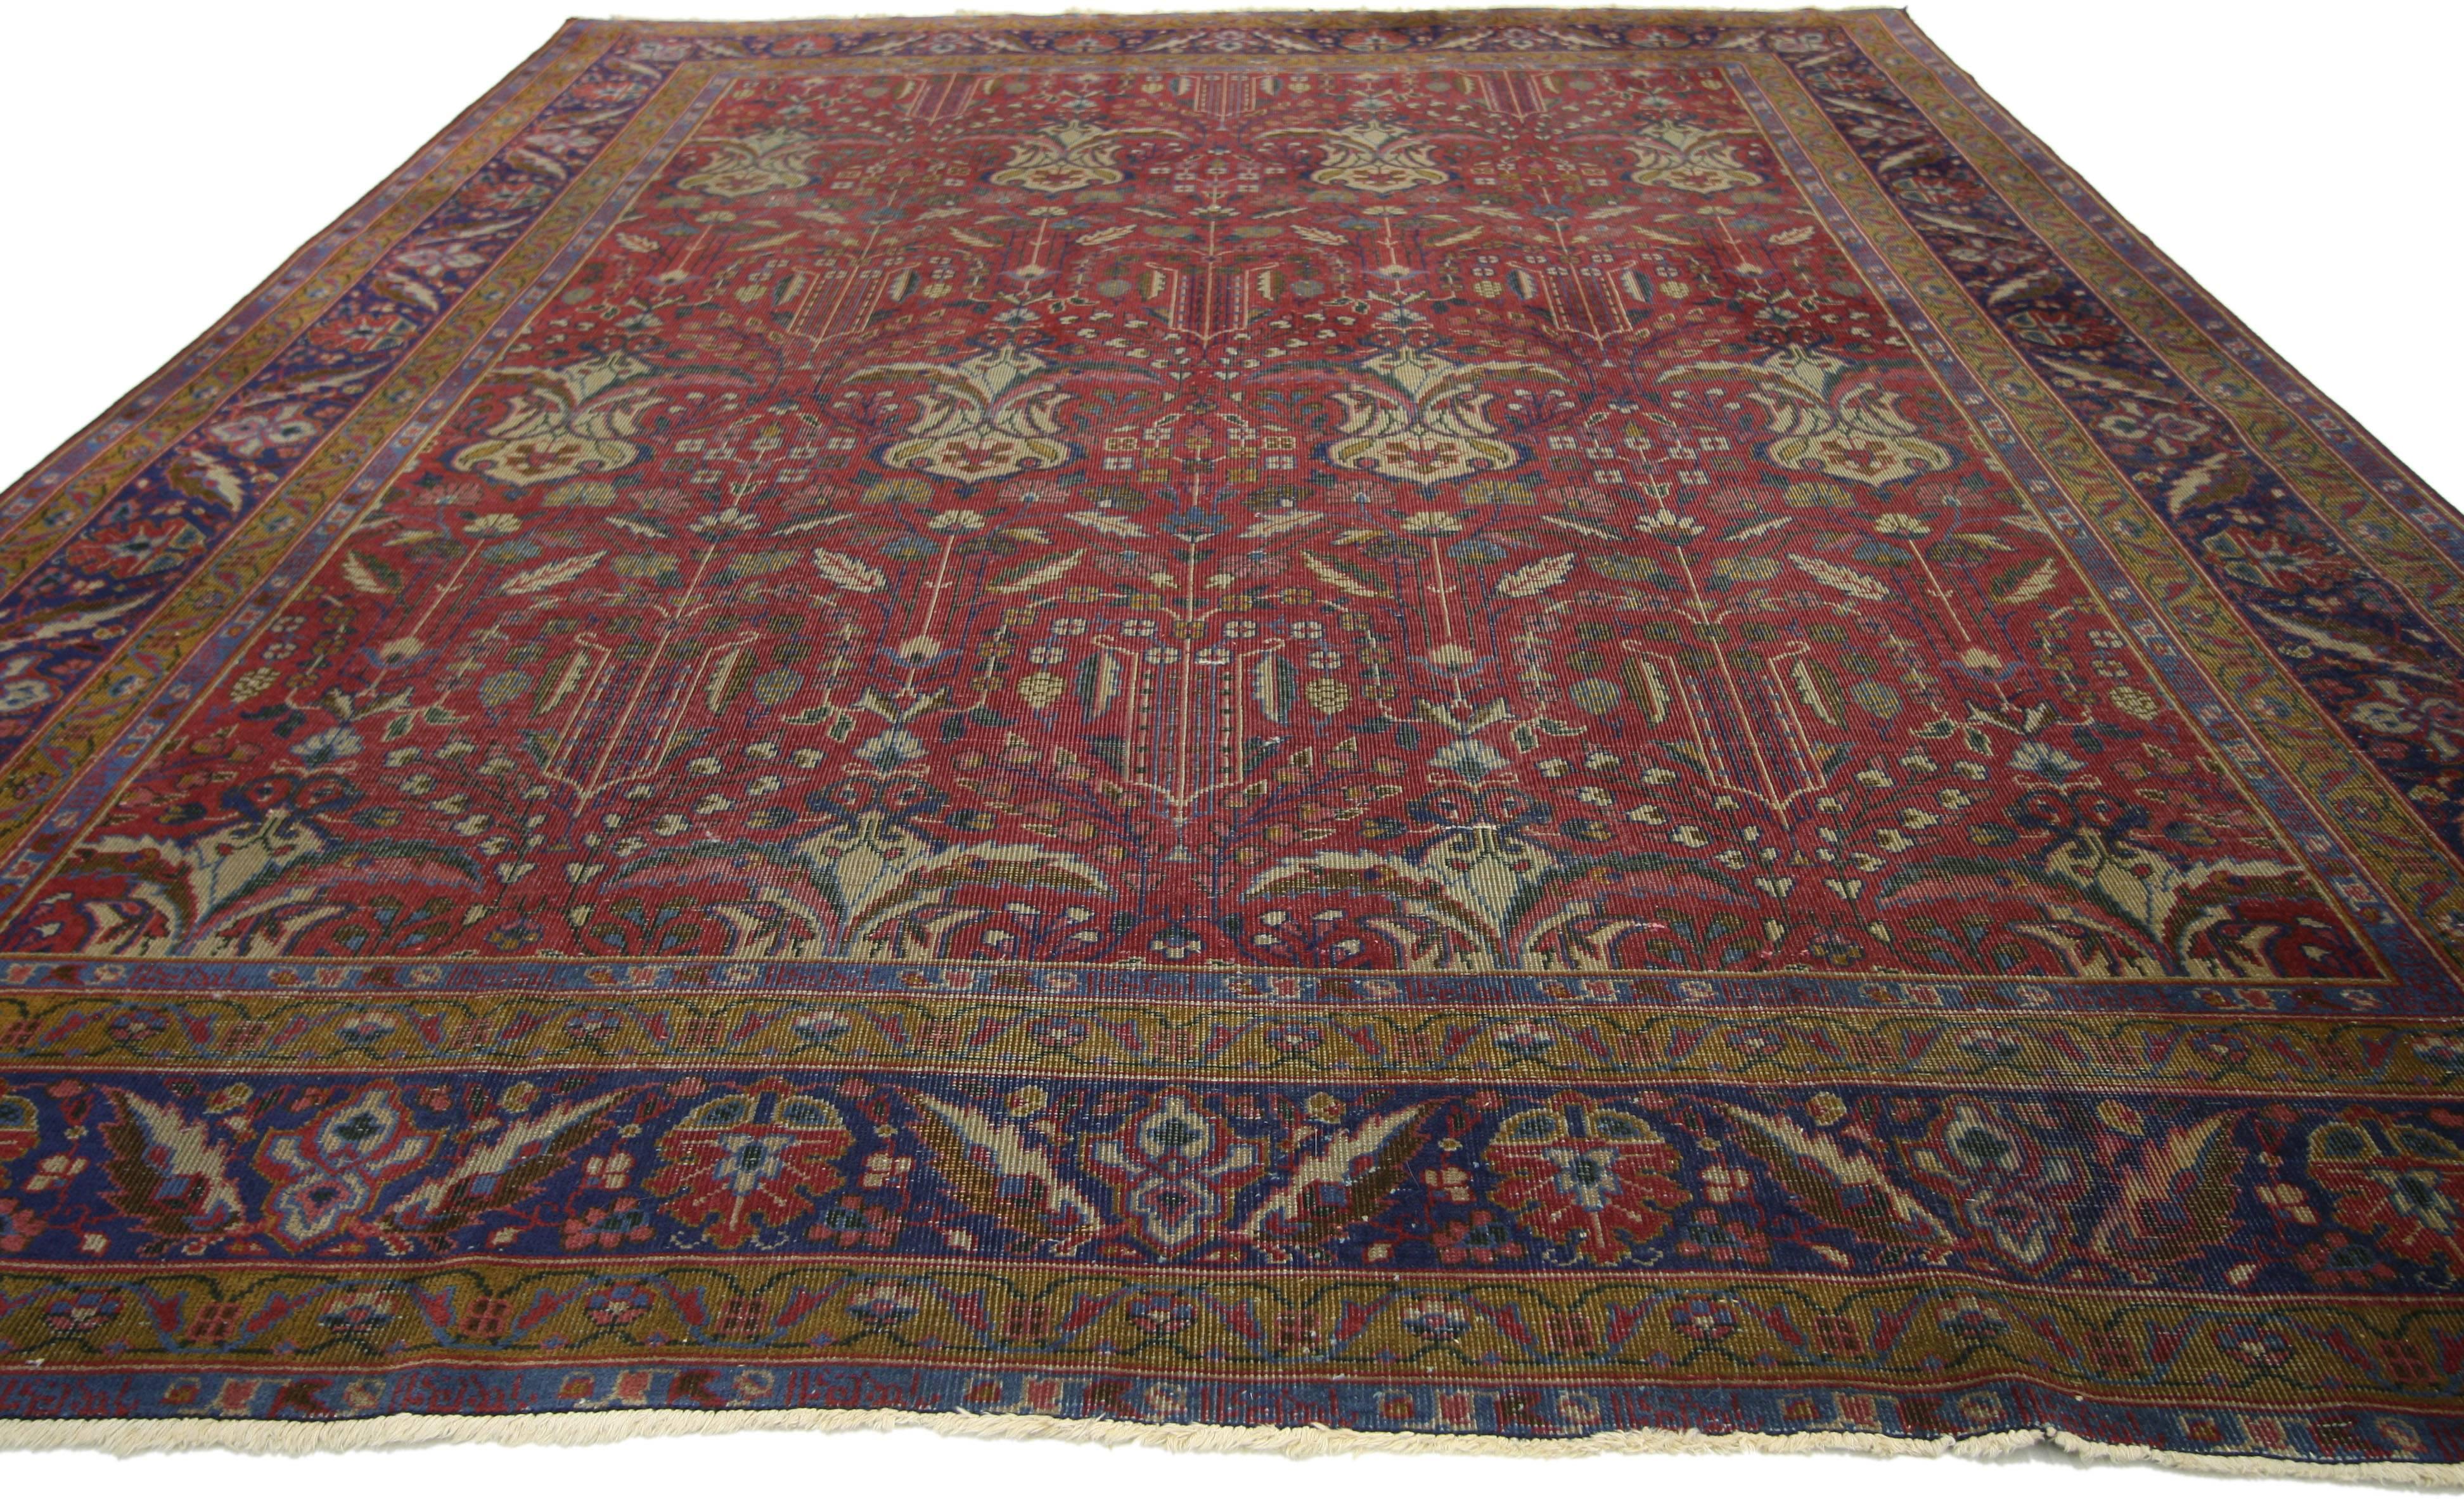 72879, antique Indian rug with traditional Victorian style and Mughal design. This hand knotted wool antique Indian rug features an all-over floral pattern spread across an abrashed ruby red field. Drawing inspiration from traditional Mughal